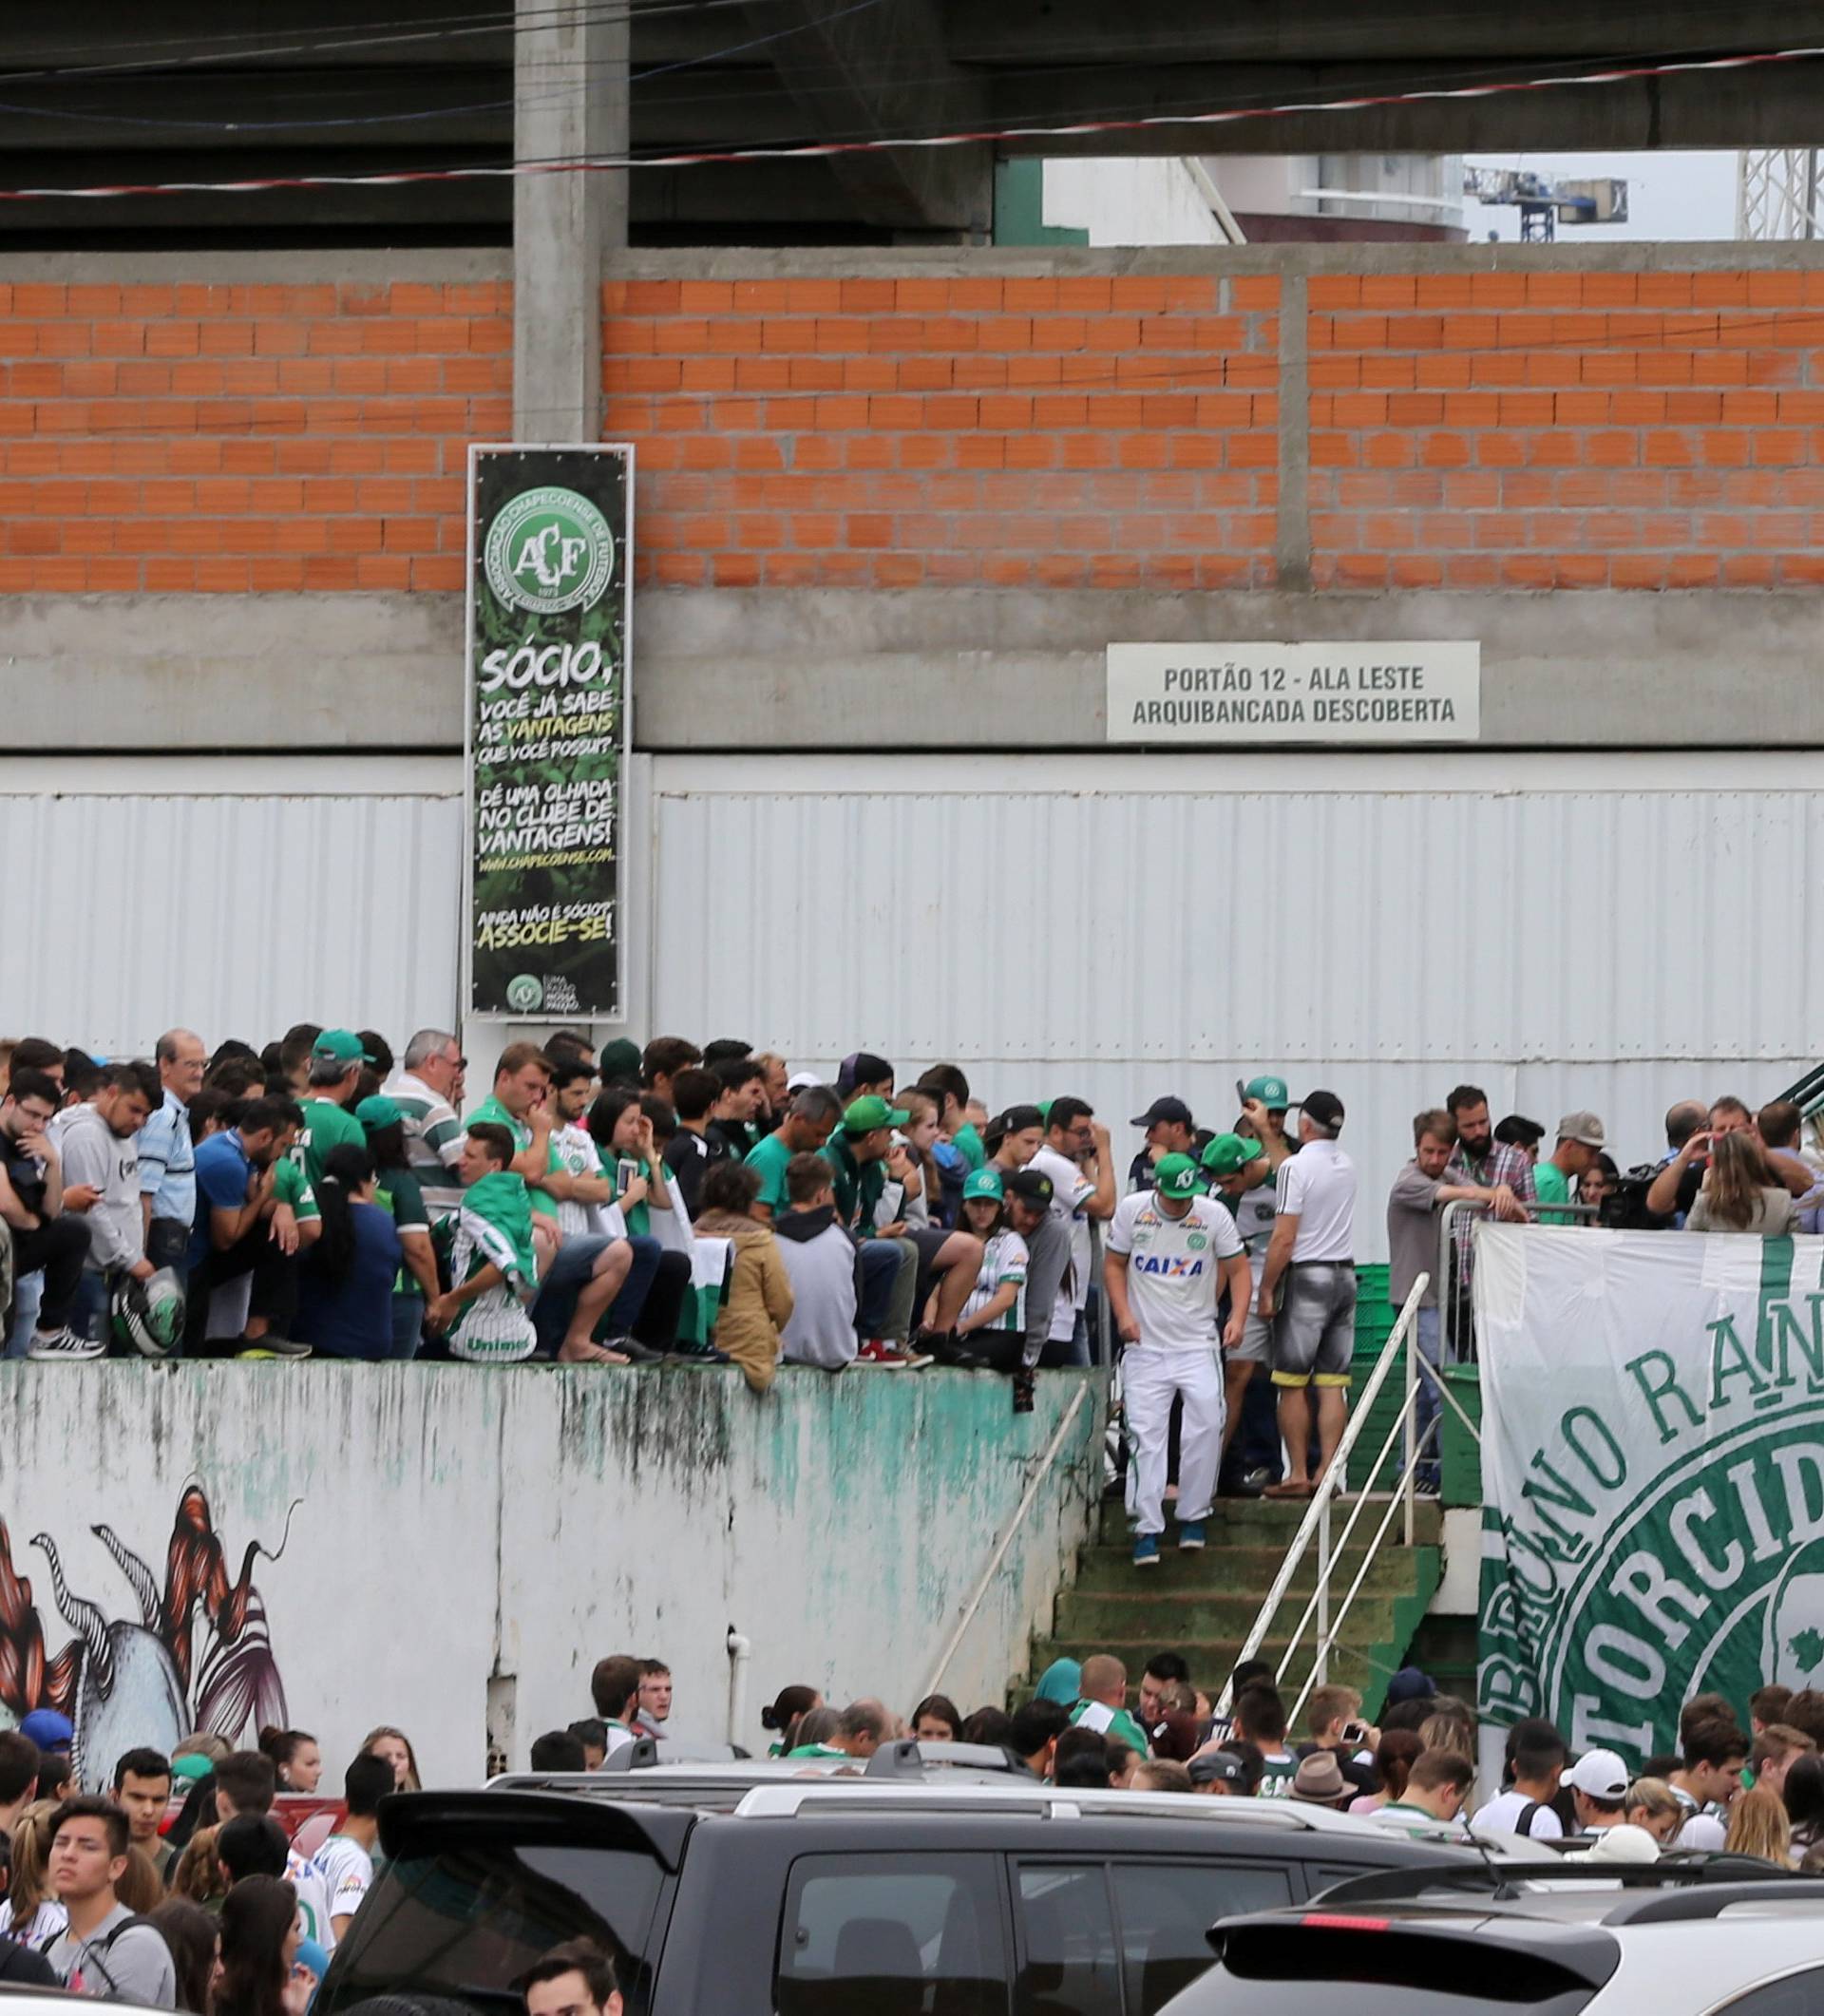 Fans of Chapecoense soccer team are pictured in front of the Arena Conda stadium in Chapeco